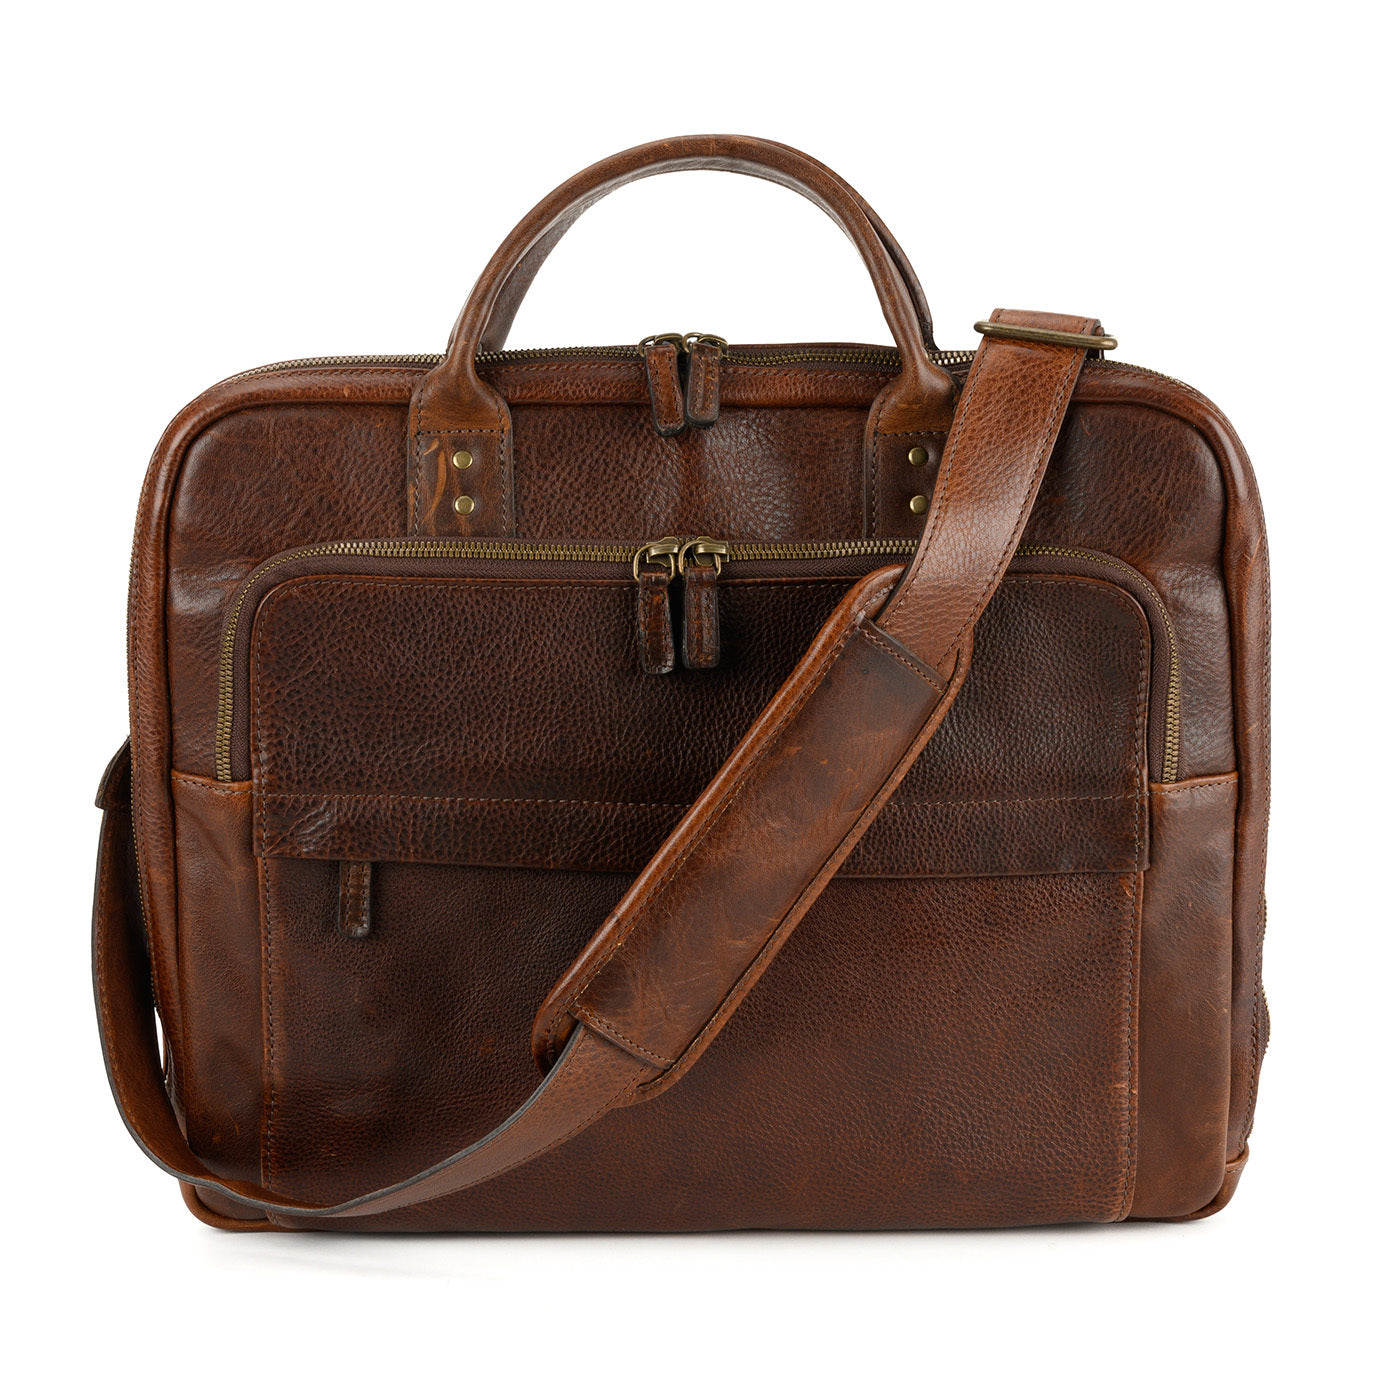 Jay Modern Briefcase in Titan Milled Brown by Moore & Giles